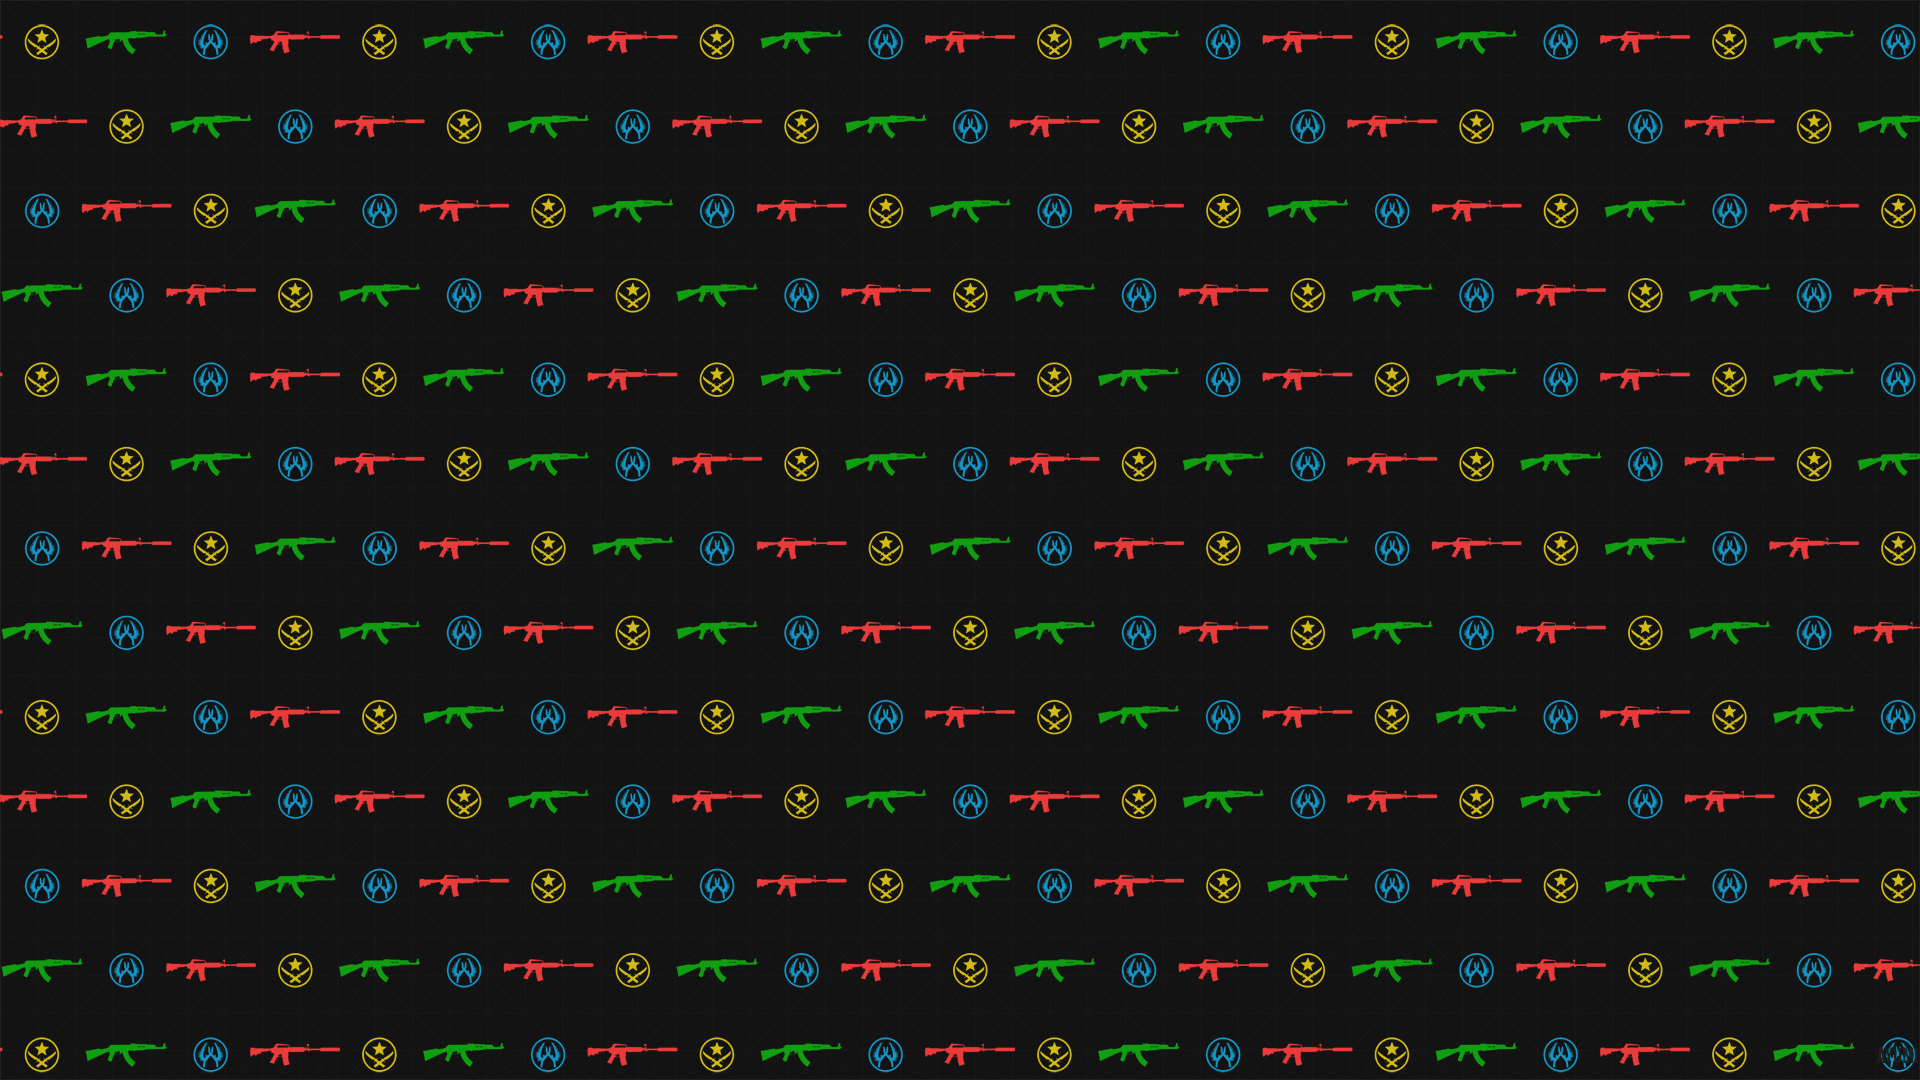 Counter Strike: Global Offensive Wallpaper Group (159)